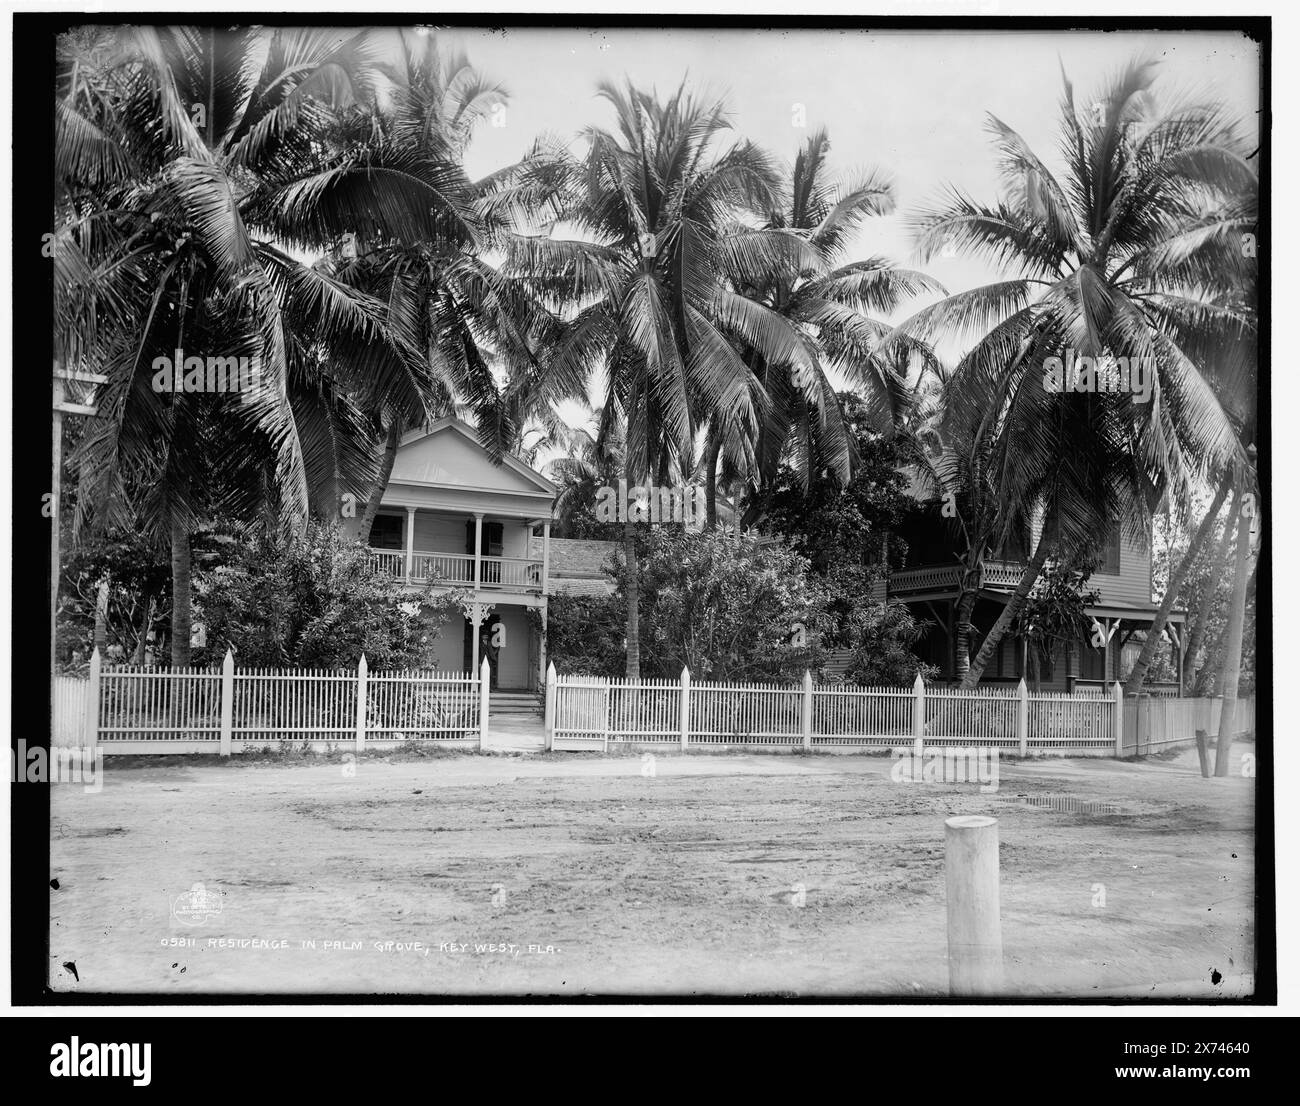 Residence in Palm Grove, Key West, Florida, Detroit Publishing Co. No. 05811., Geschenk; State Historical Society of Colorado; 1949, Dwellings. Usa, Florida, Key West. Stockfoto